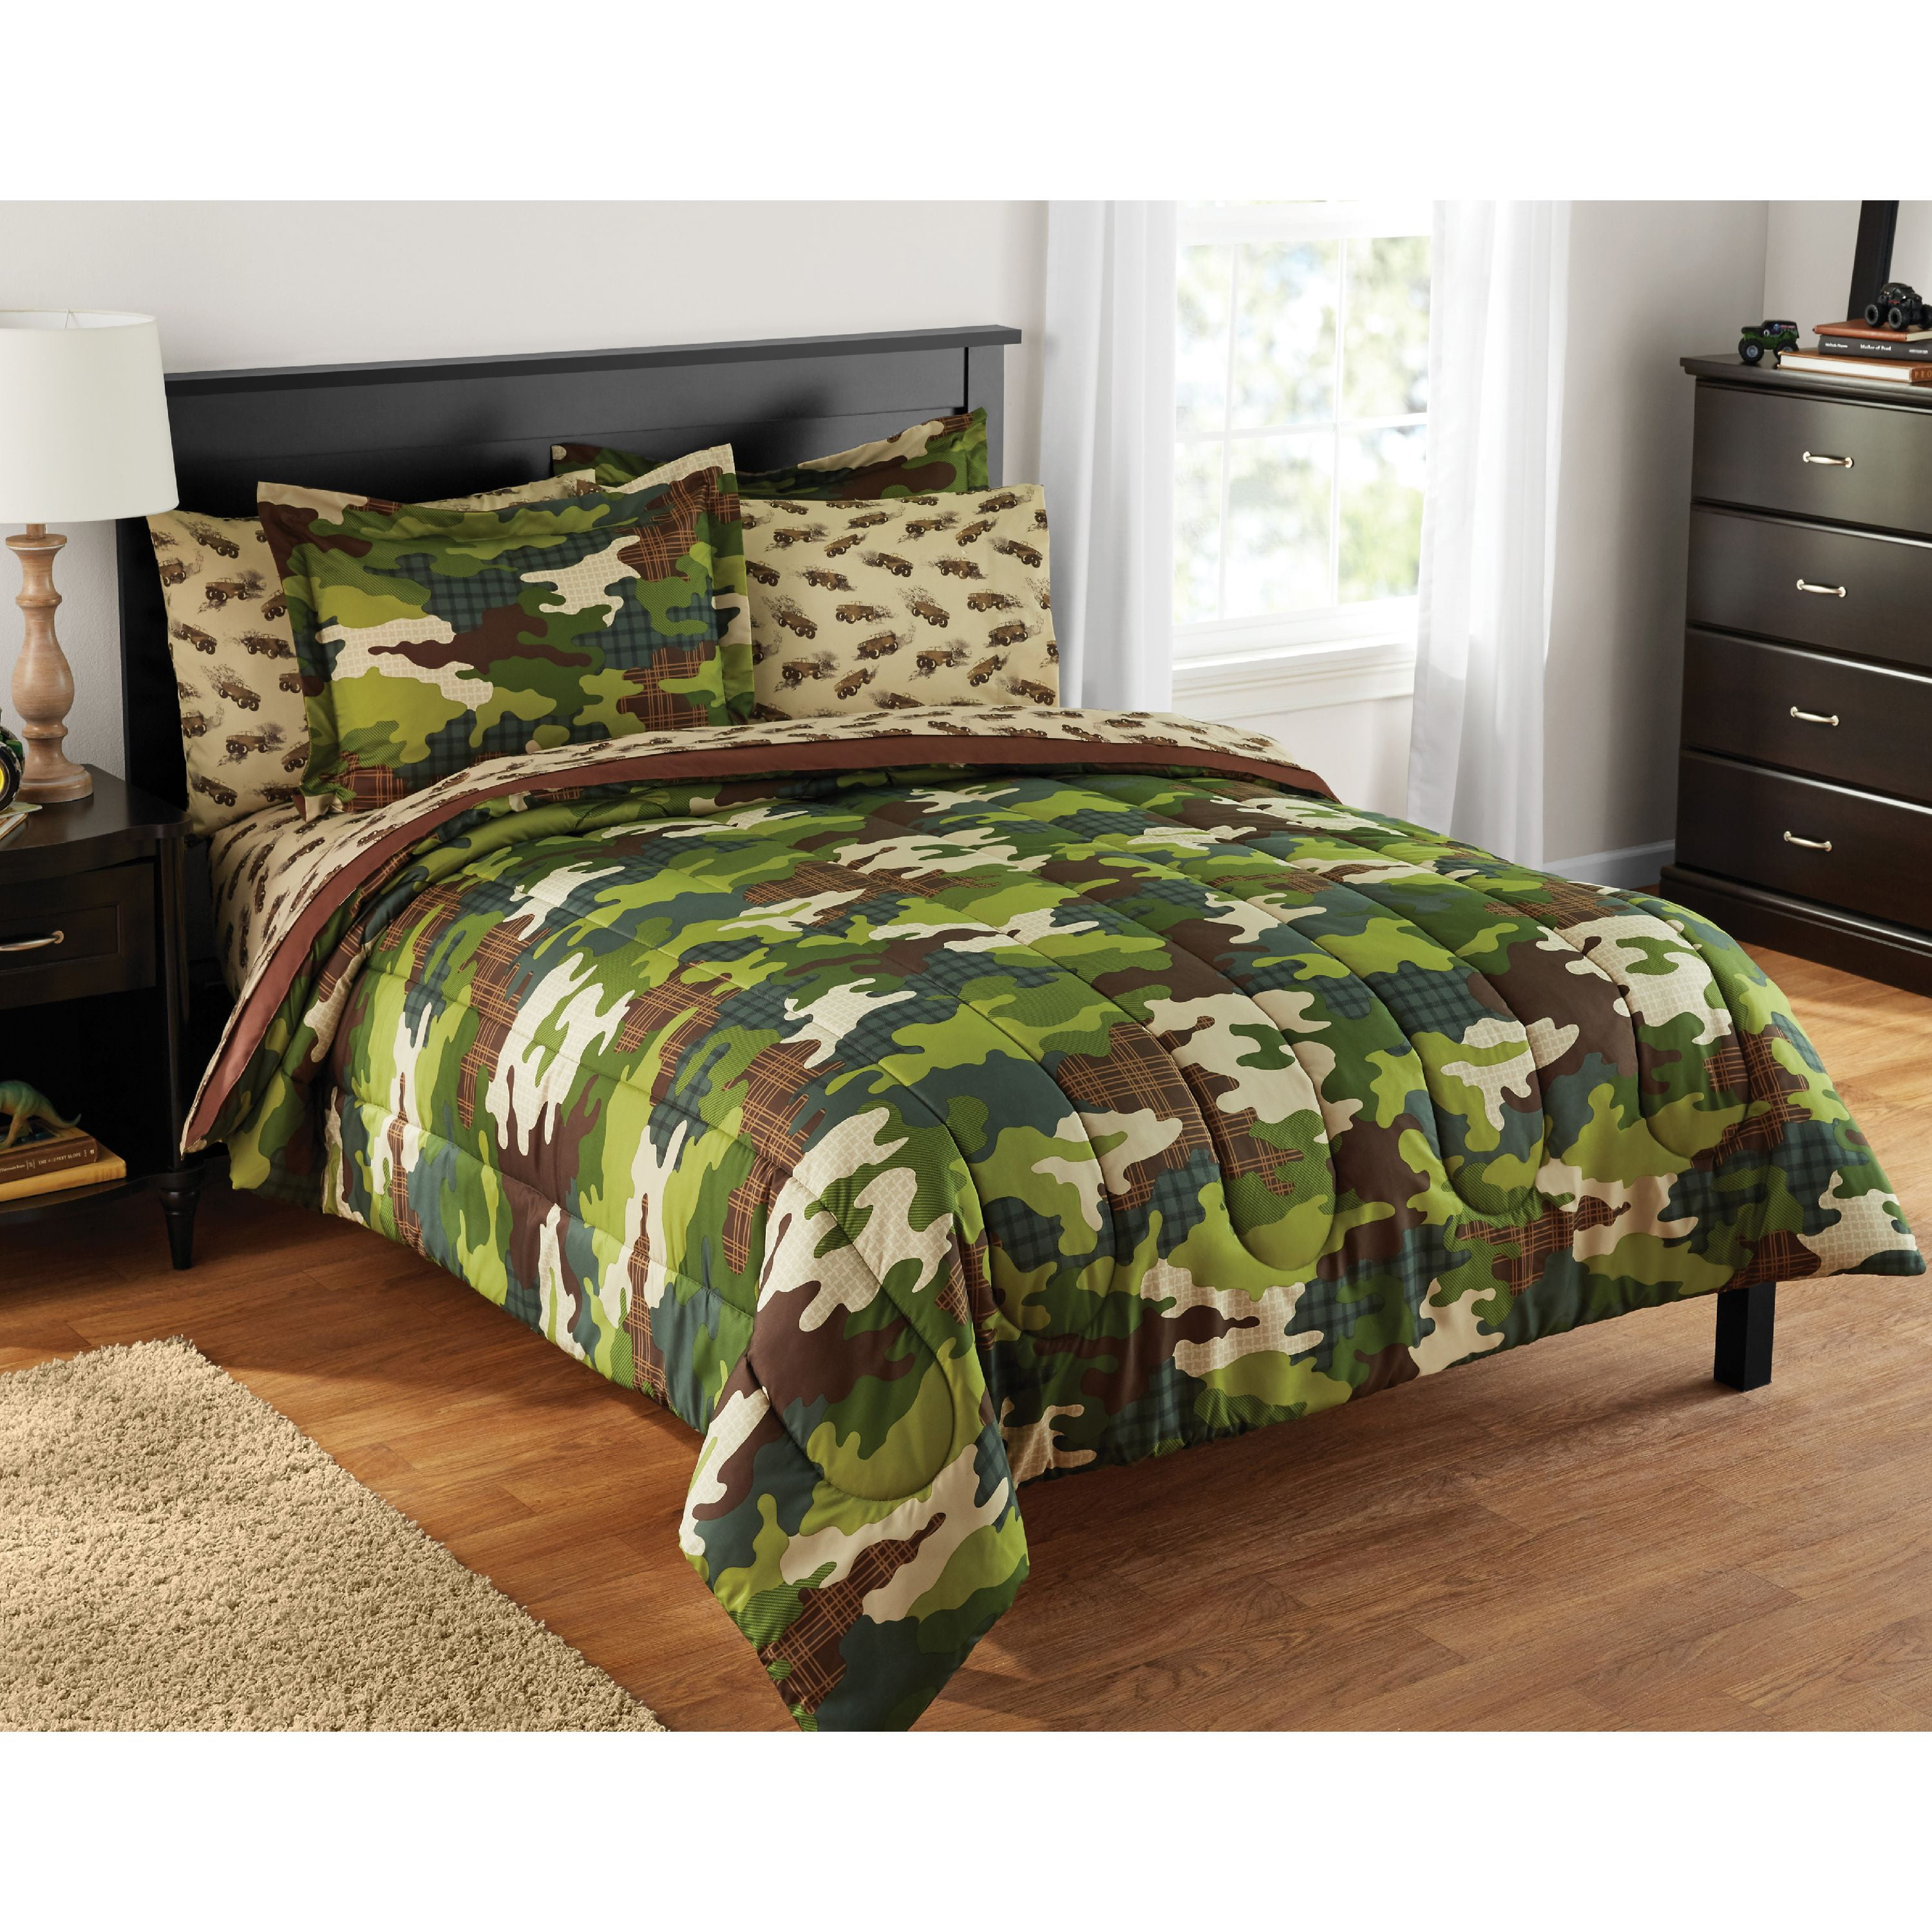 Boys Comforter Set Army Kids Full Bed in a Bag 7 Pcs Bedding Sheets Military NEW 